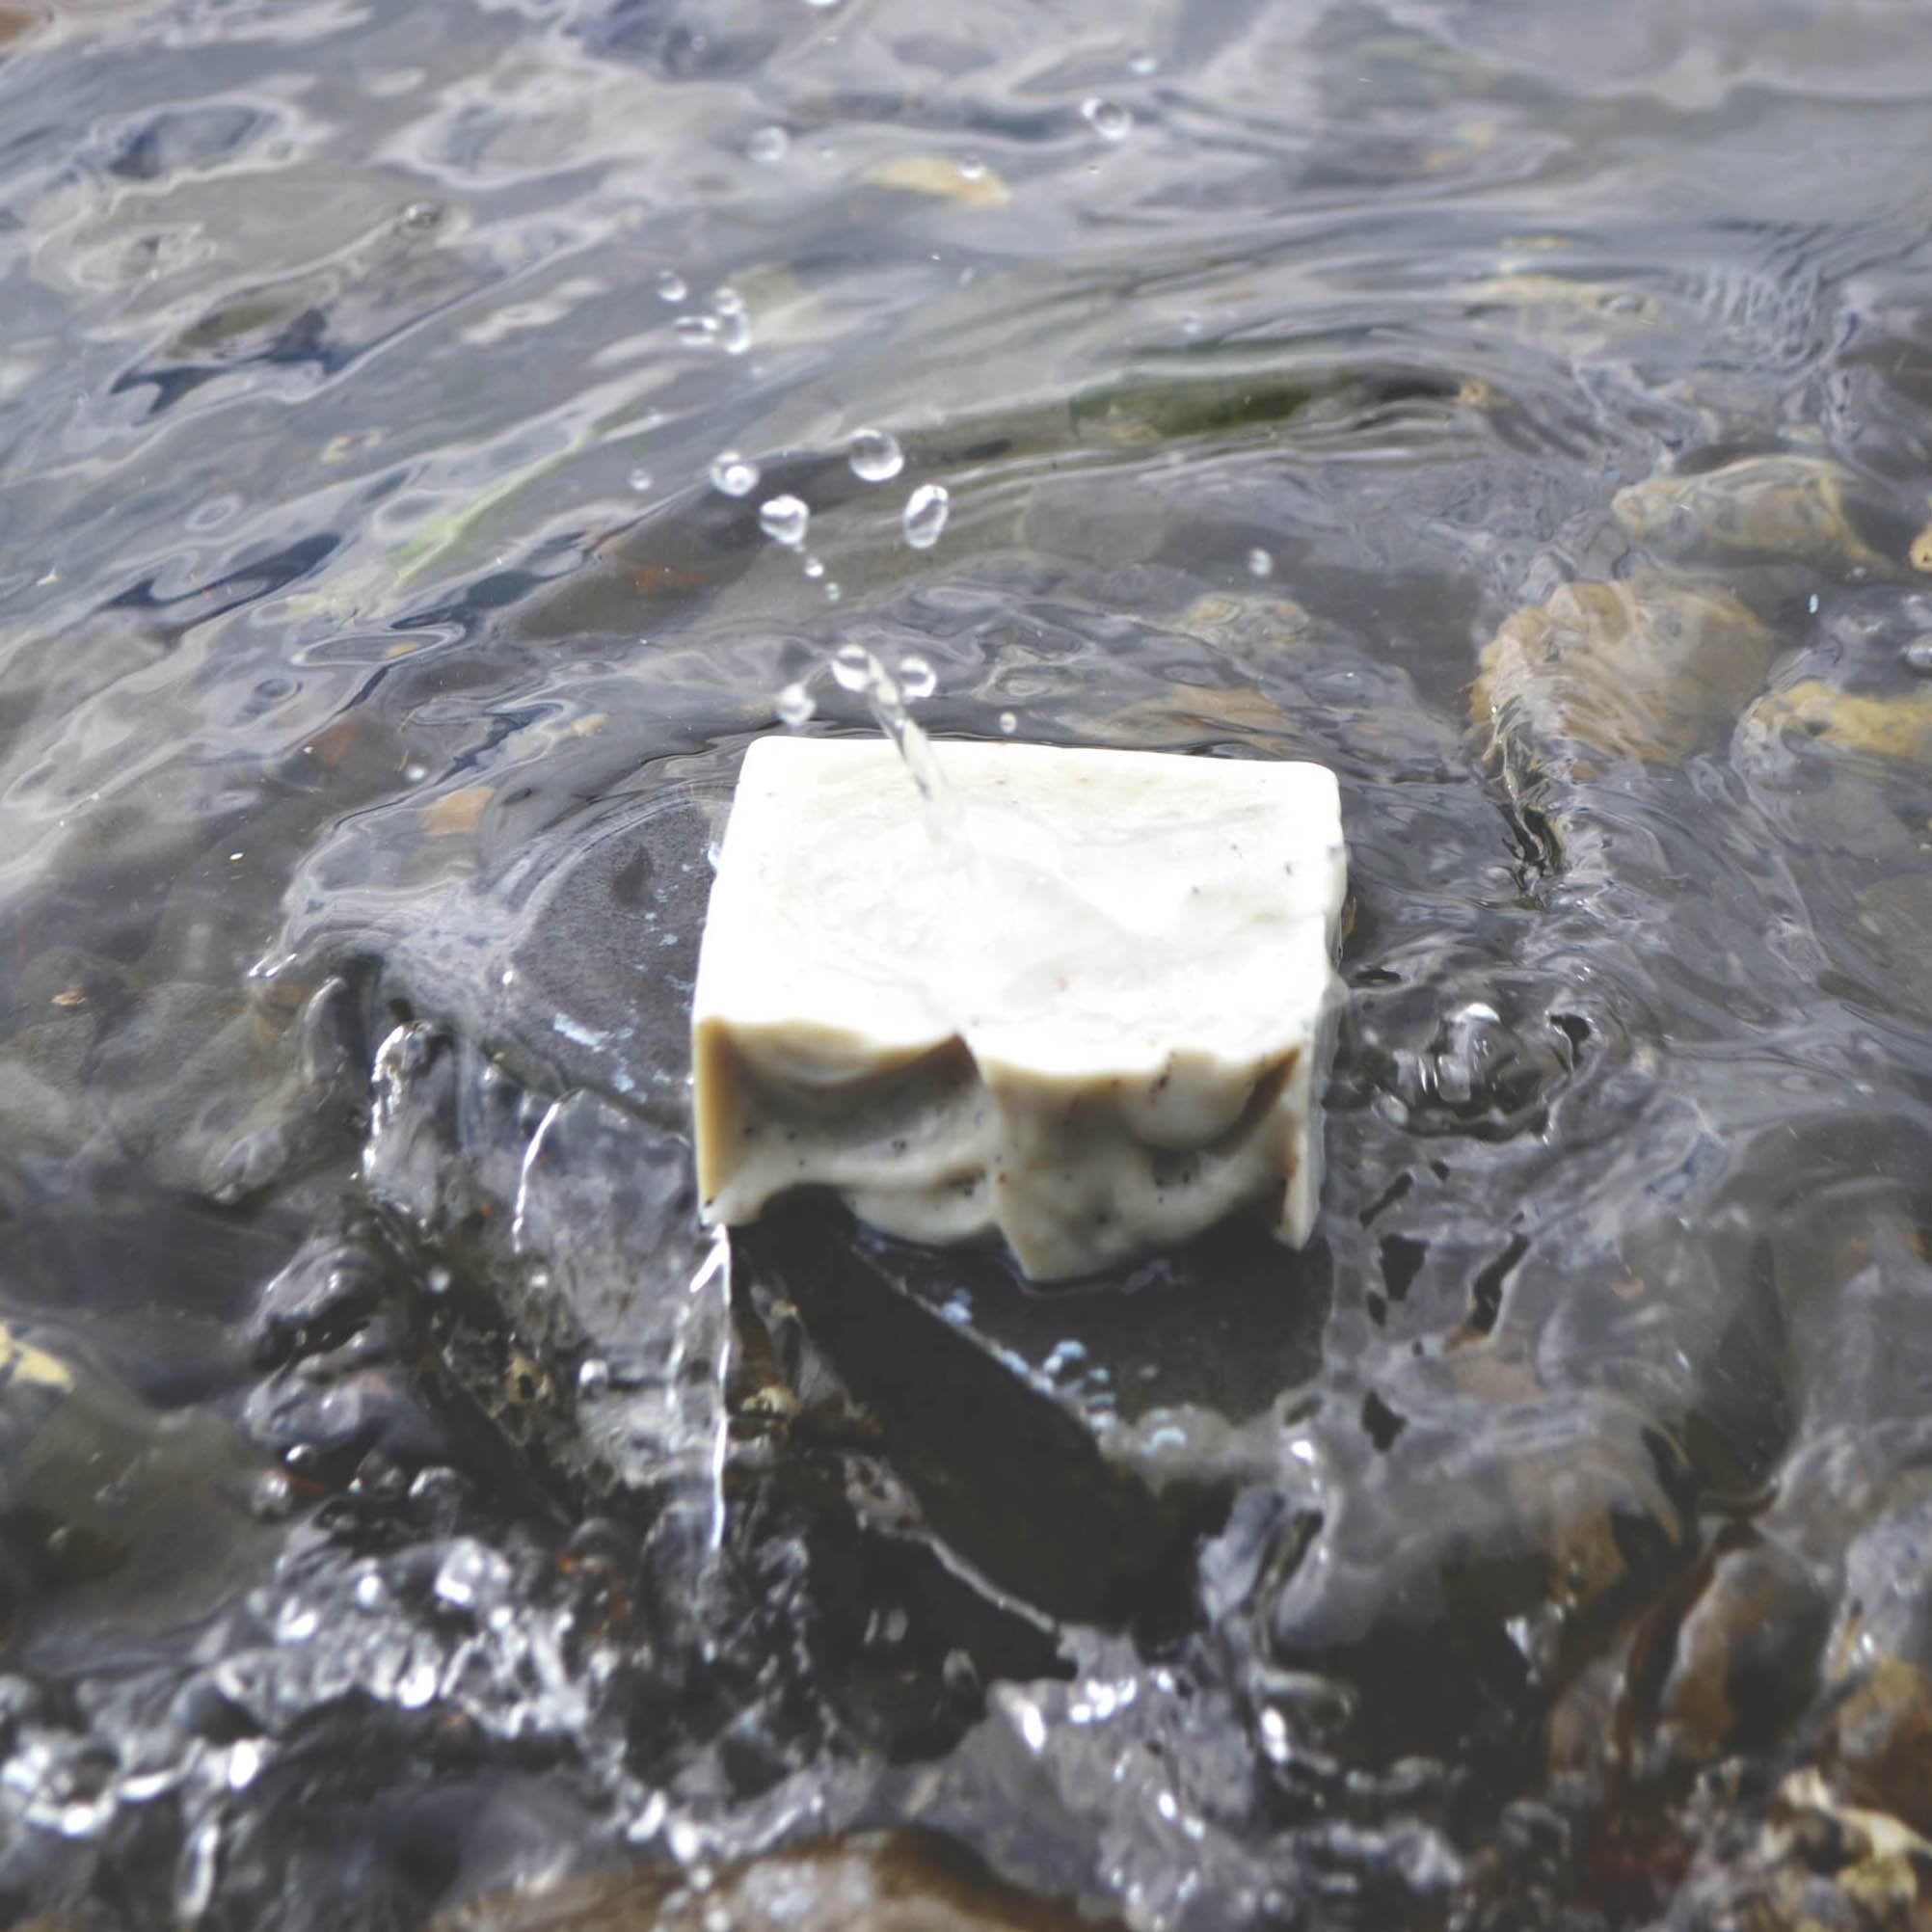 A blue-grey bar of soap sits on a rock at the shore of the ocean. It is lightly splashed by a wave.